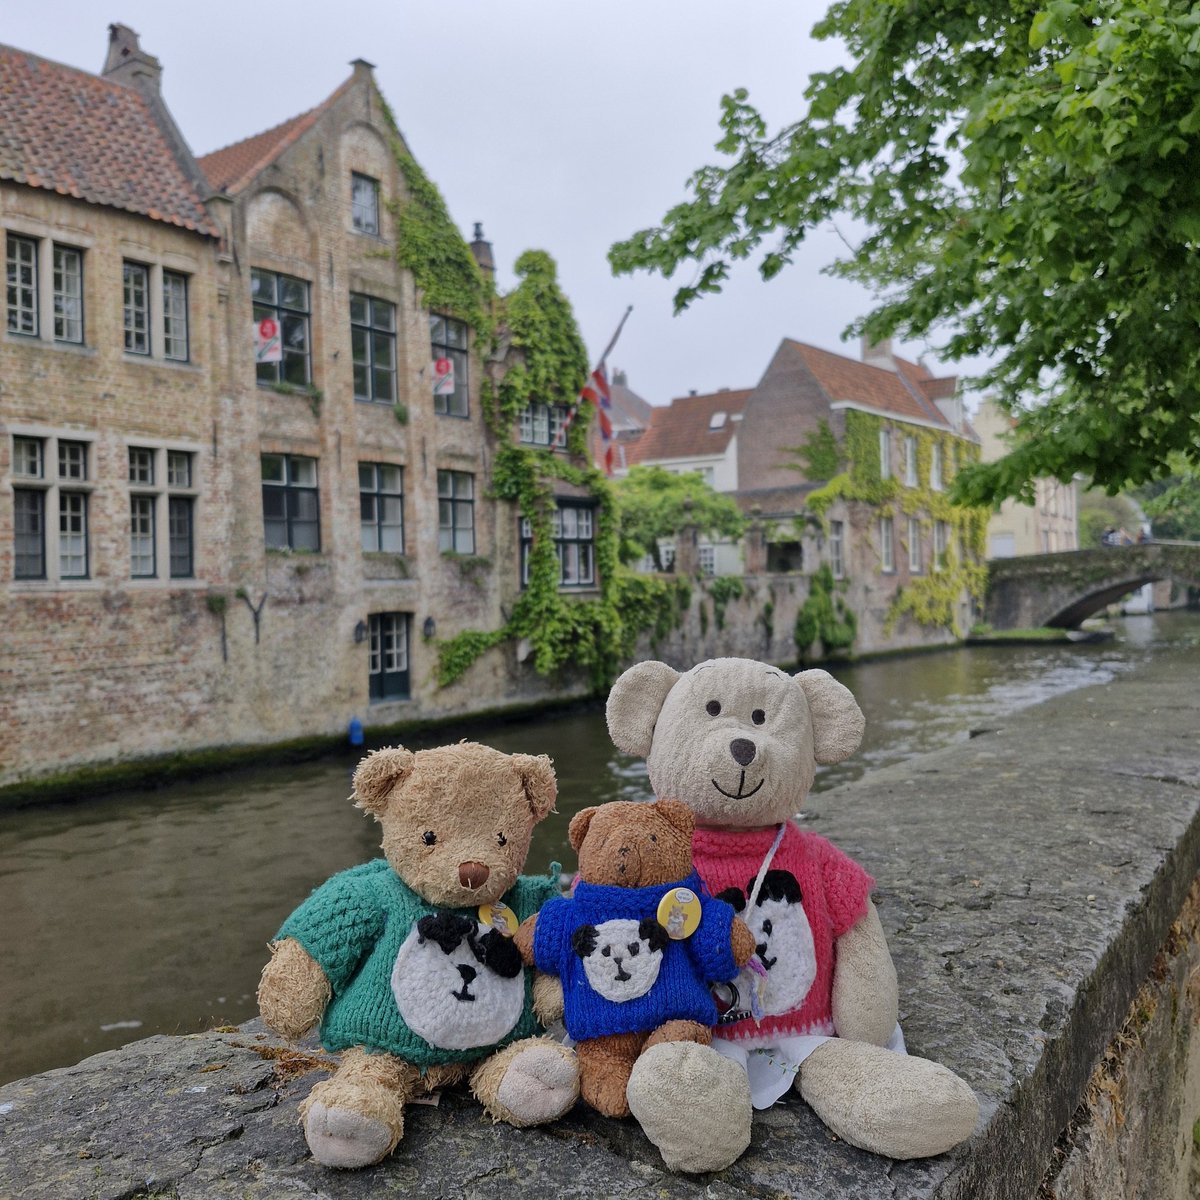 The removal company's FINALLY here with the rest of the bears, but just before they arrived, we'd time for a quick walk to the canal.